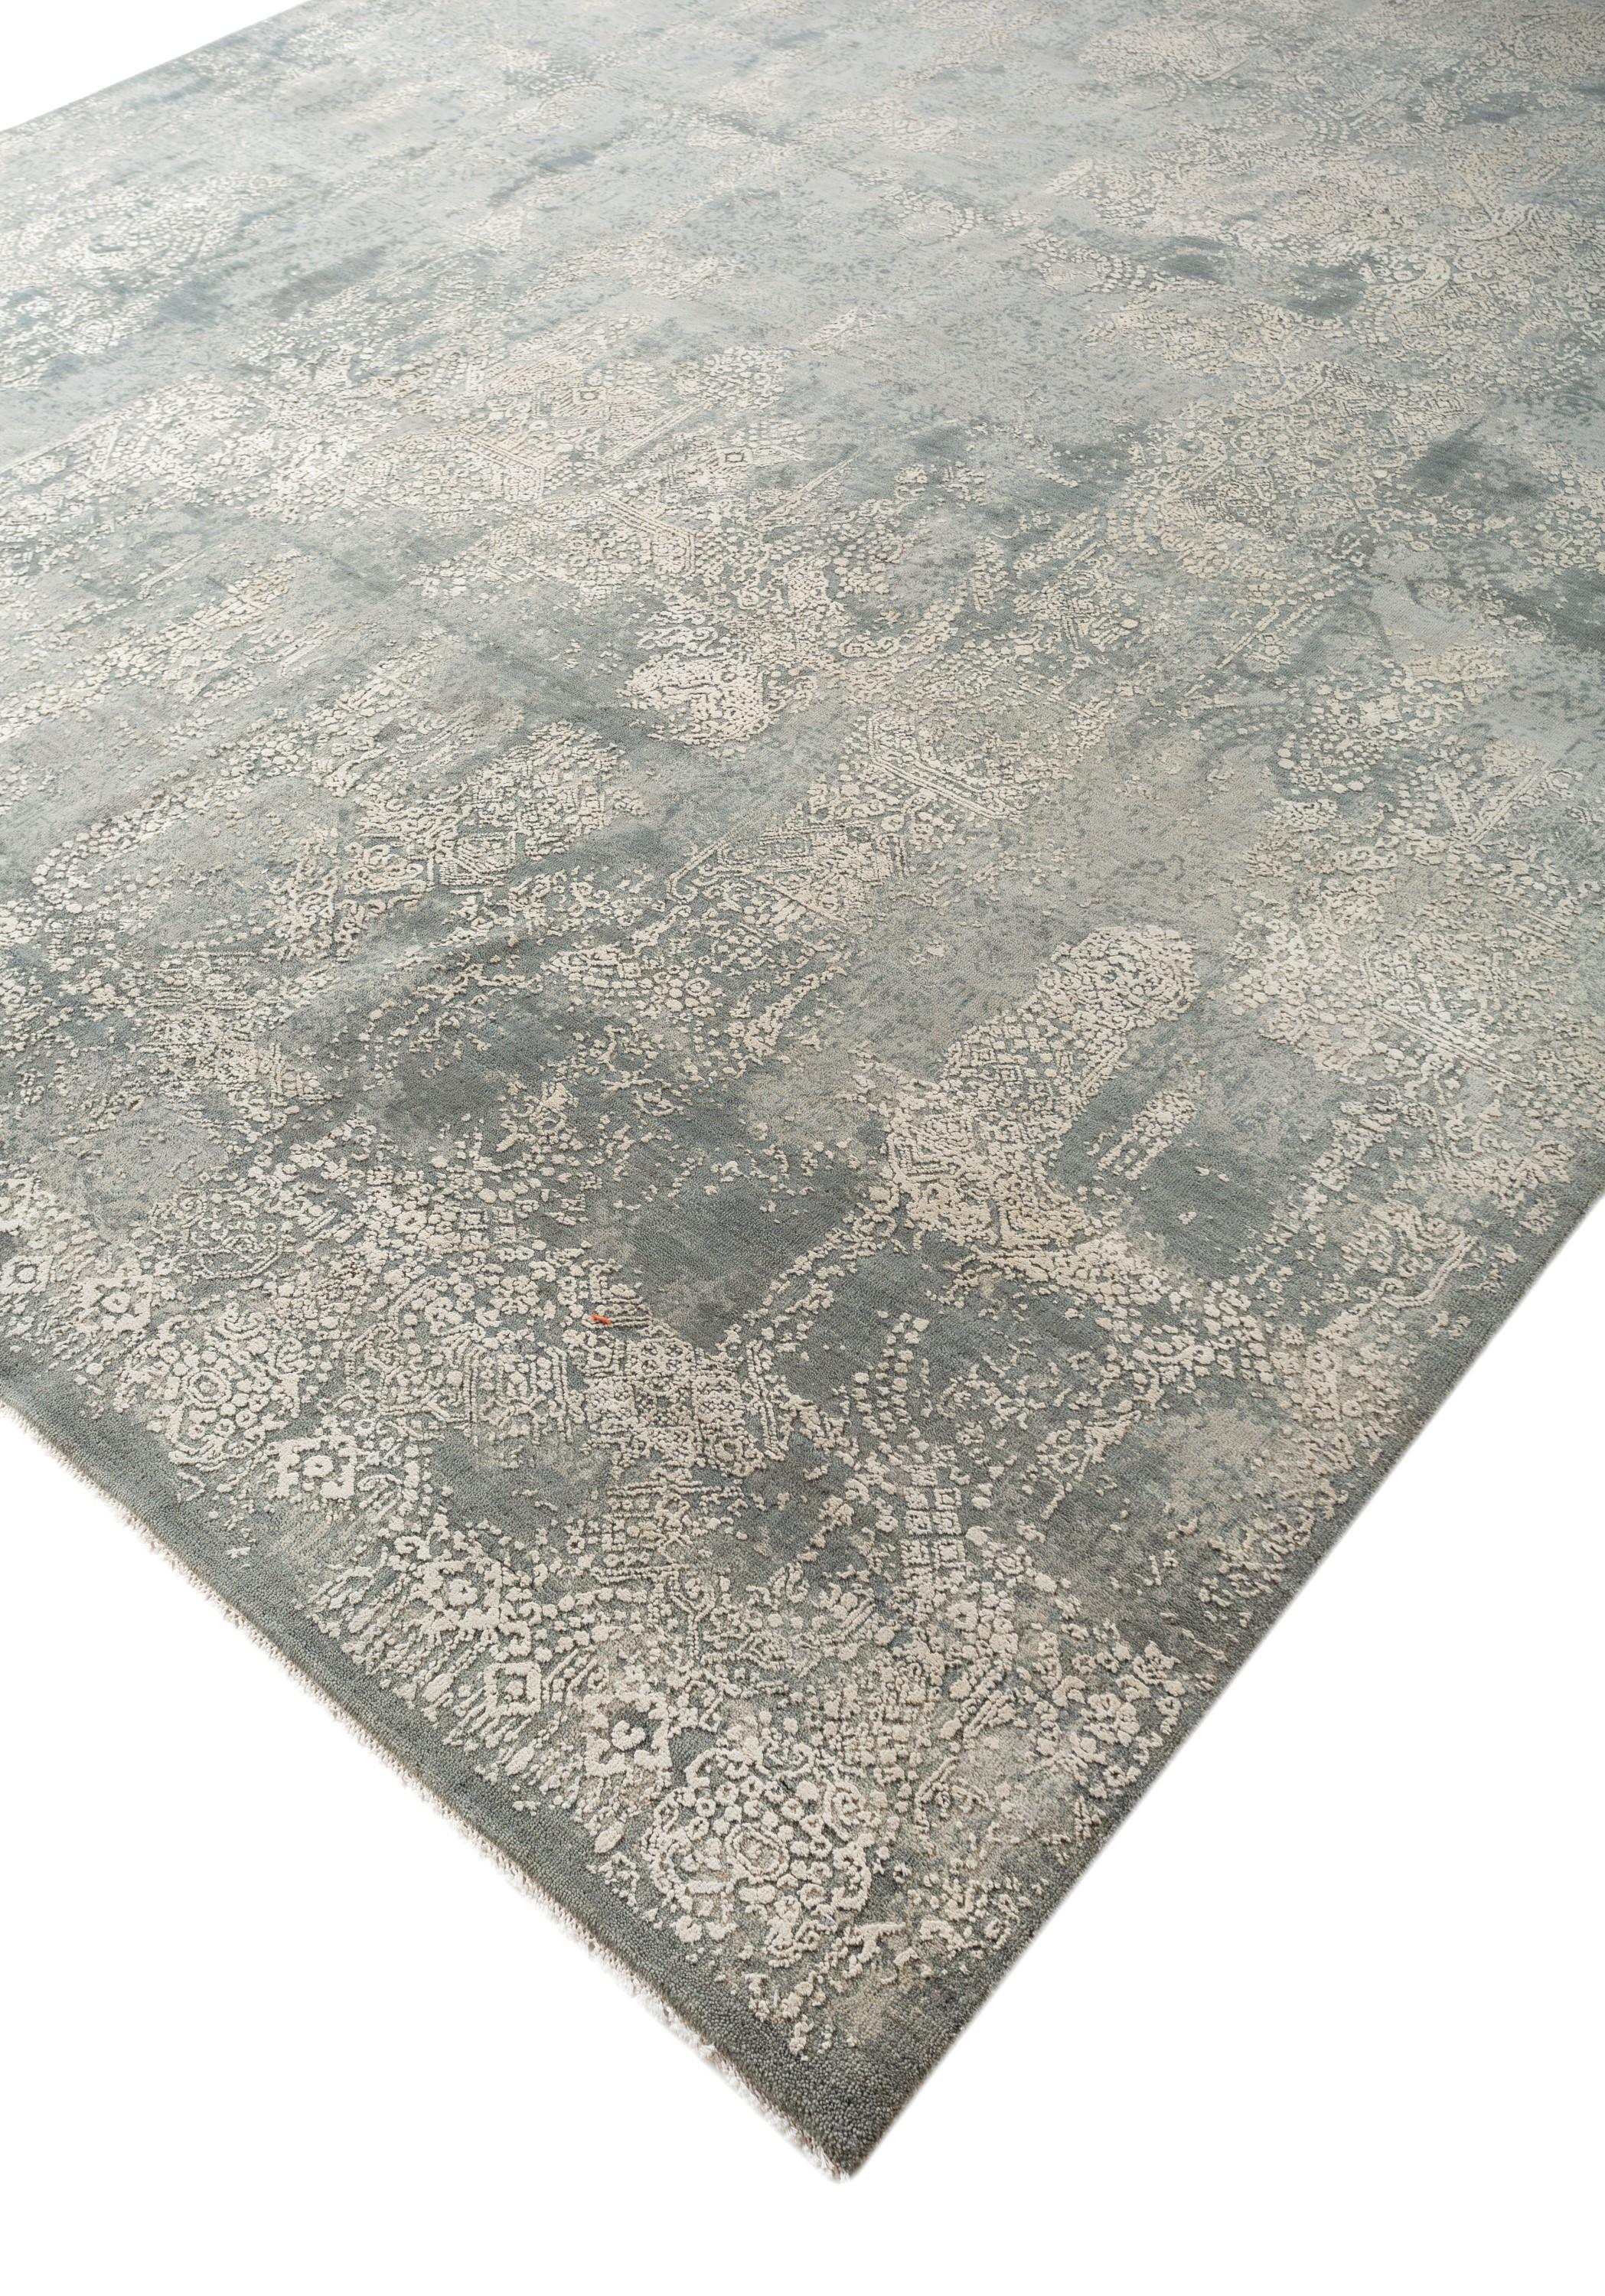 Modern Regal Verdancy Forest green & White 300X420 Cm Handknotted Rug For Sale